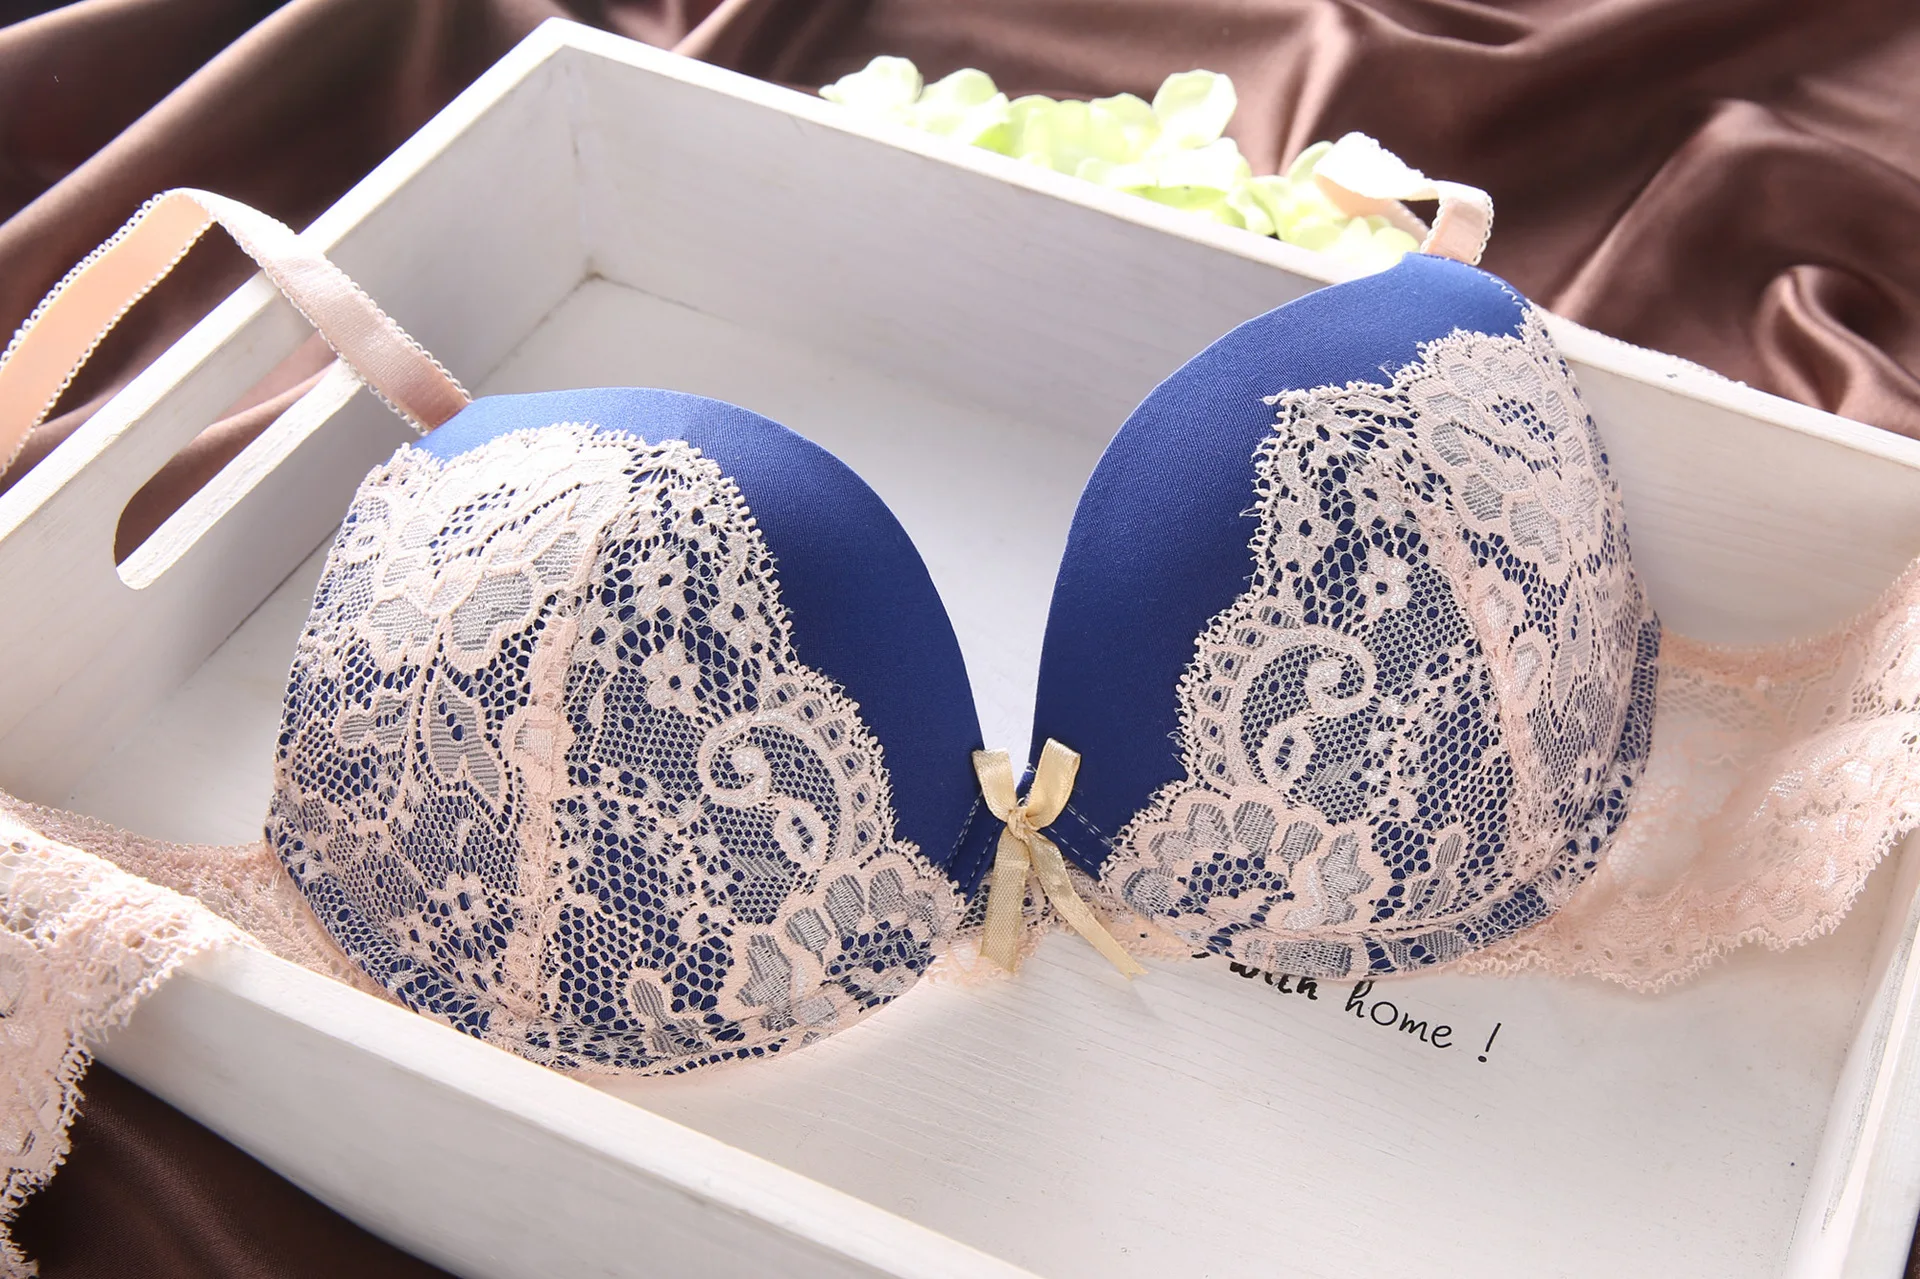 Hot Women's Underwear Bowknot Bras Underwear Women Bras B/C Cup Lingerie Set With Brief Sexy Lingerie Lace Embroidery Bra Sets bra and panty